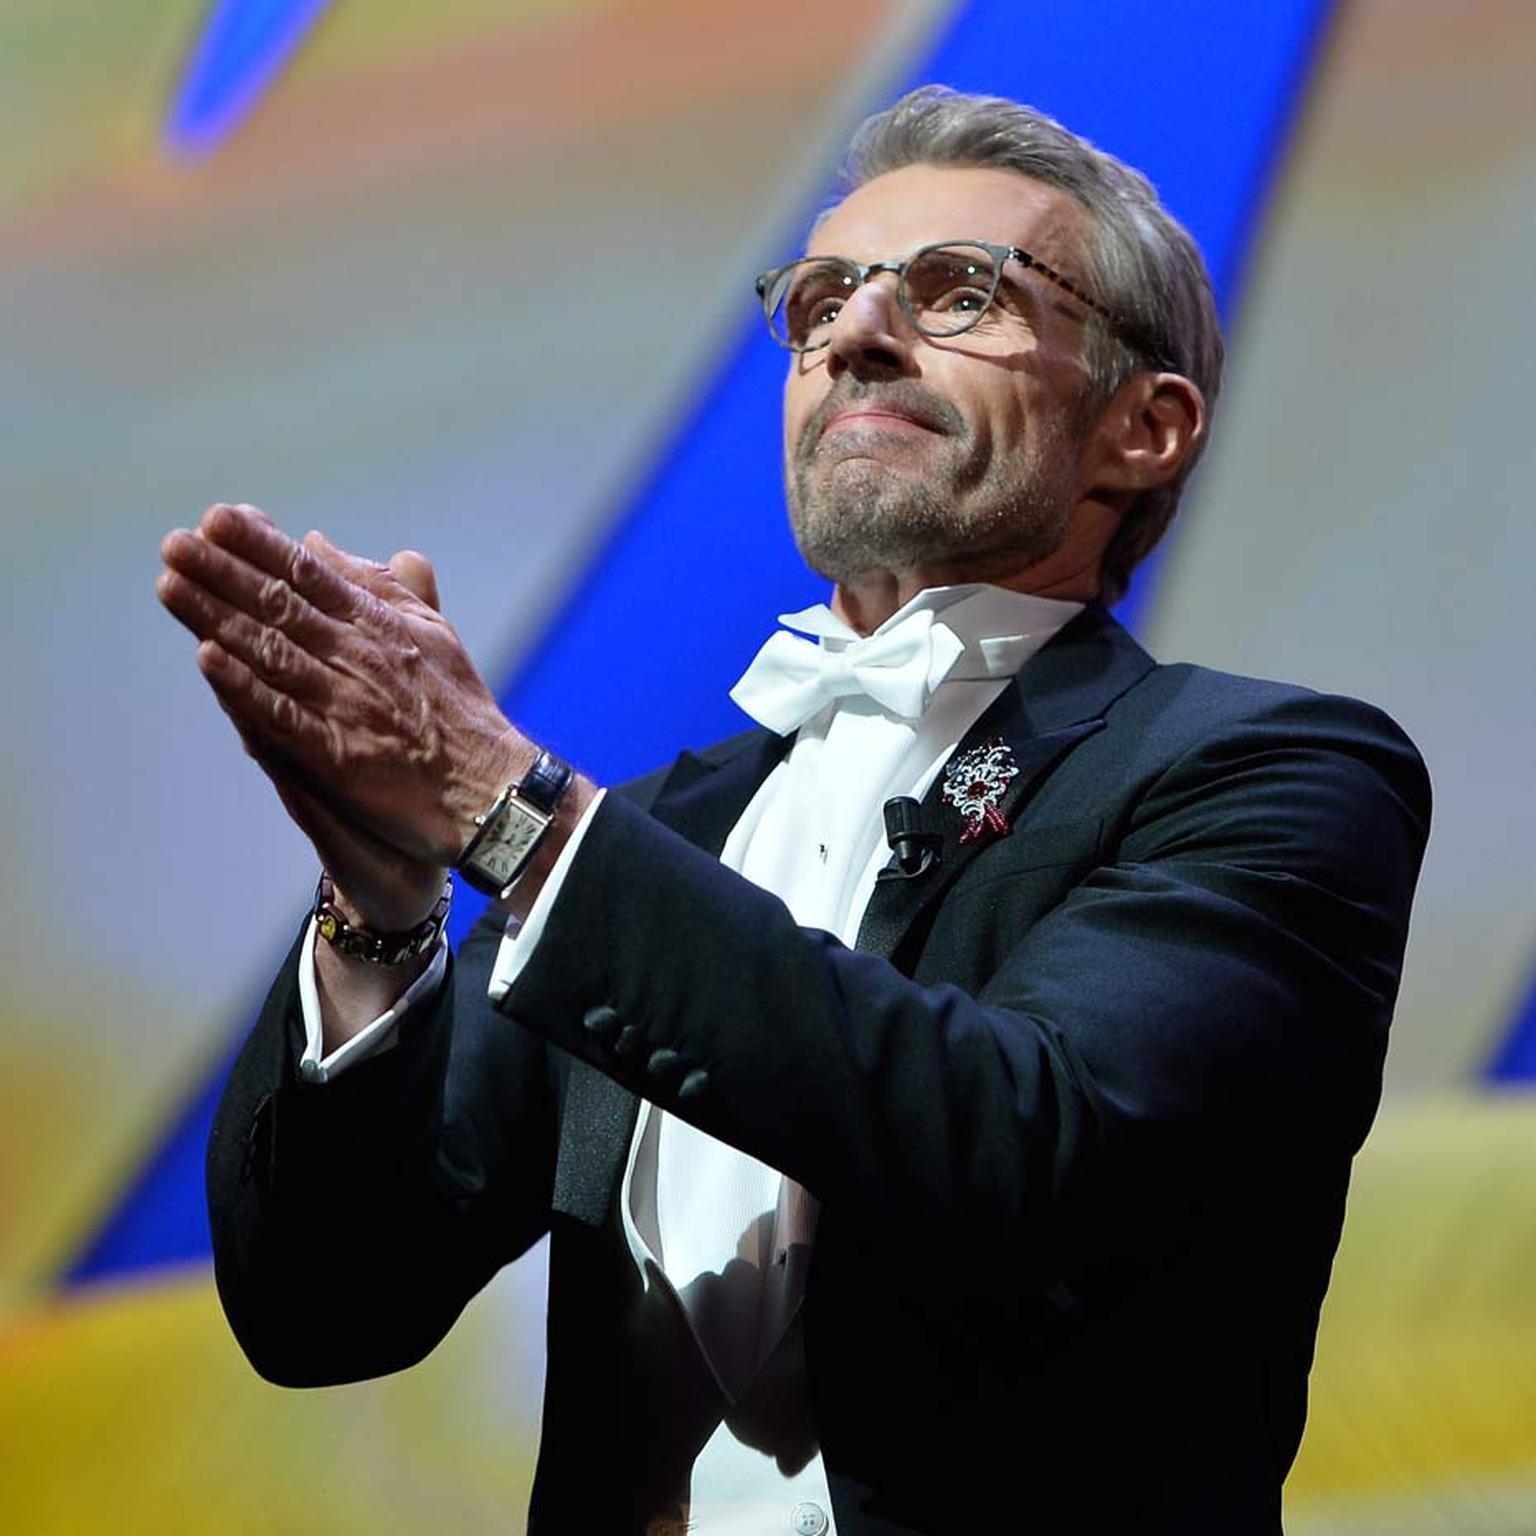 Master of ceremonies at this year's Cannes Film Festival, Lambert Wilson, showed that men, too, can sparkle in red carpet jewellery wearing a Cartier brooch set with spinels and diamonds at the opening ceremony.